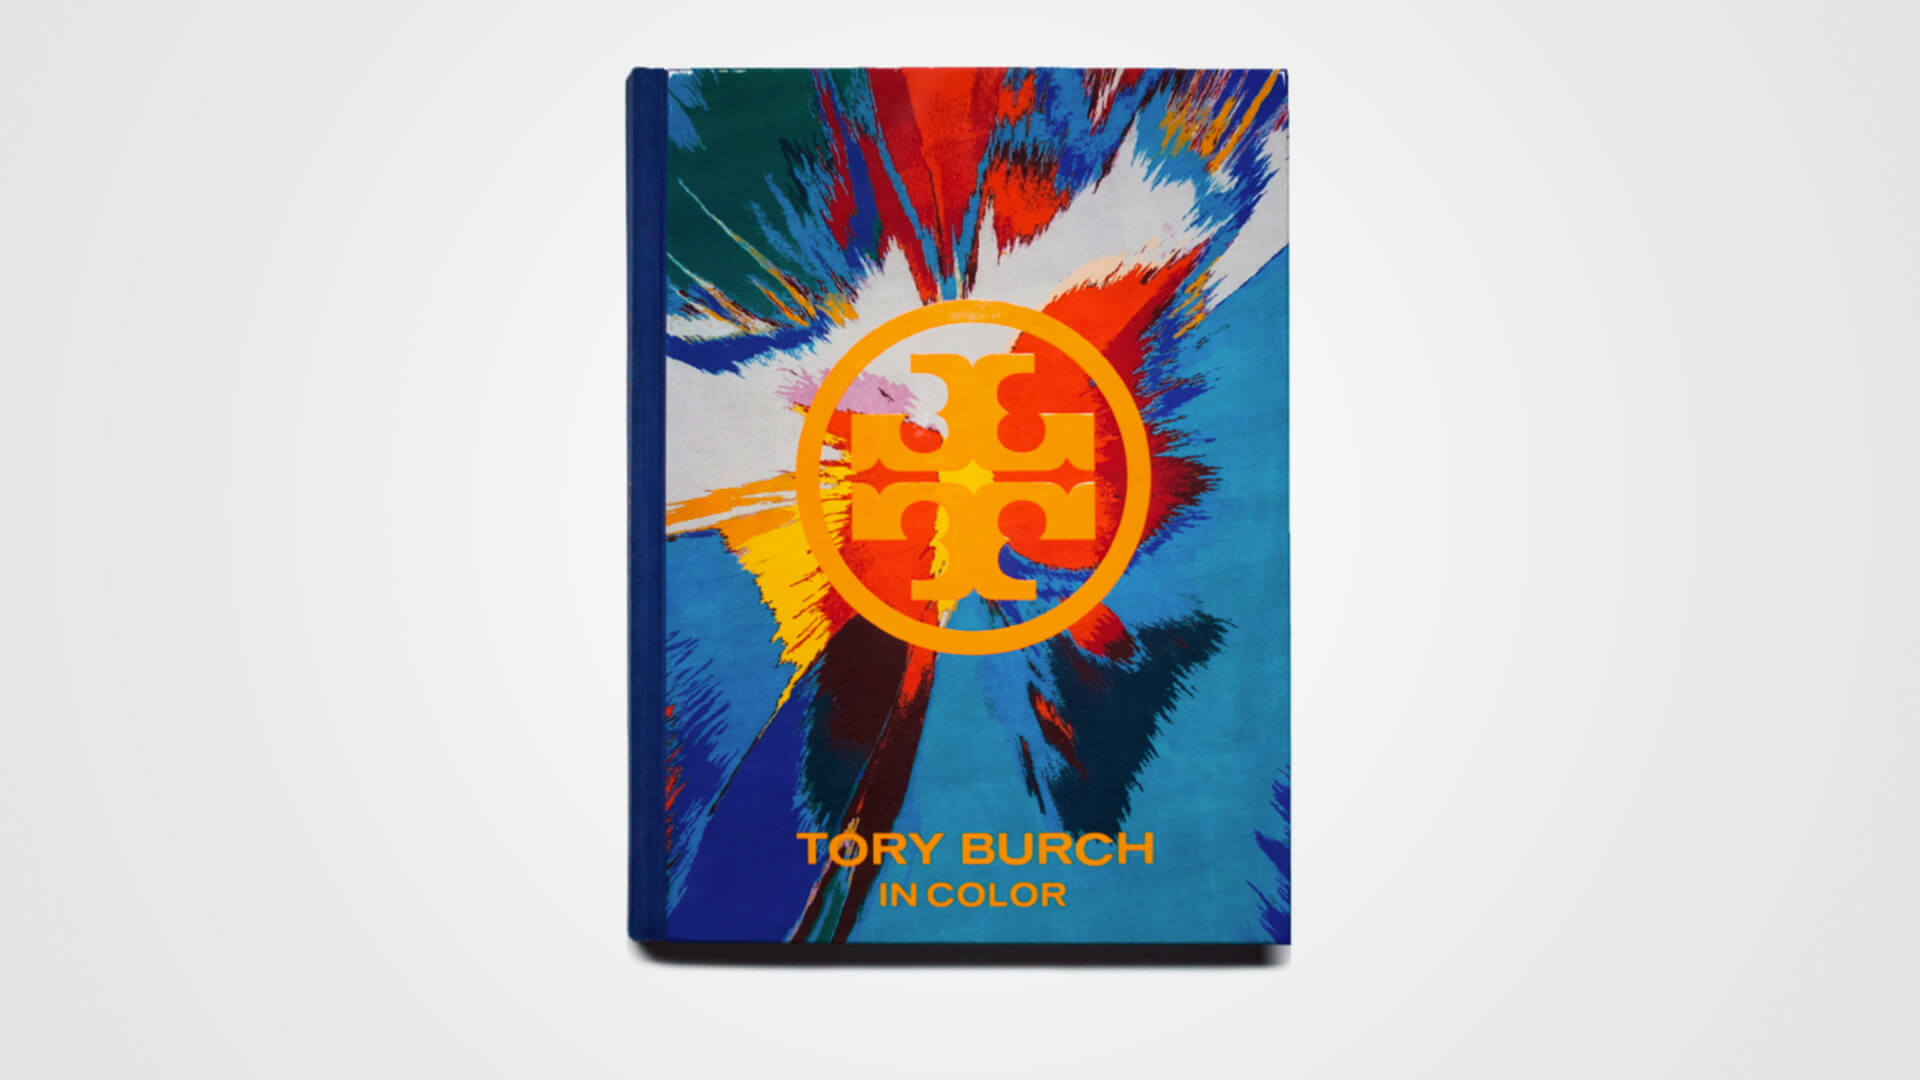 Tory Burch In Color: The Book